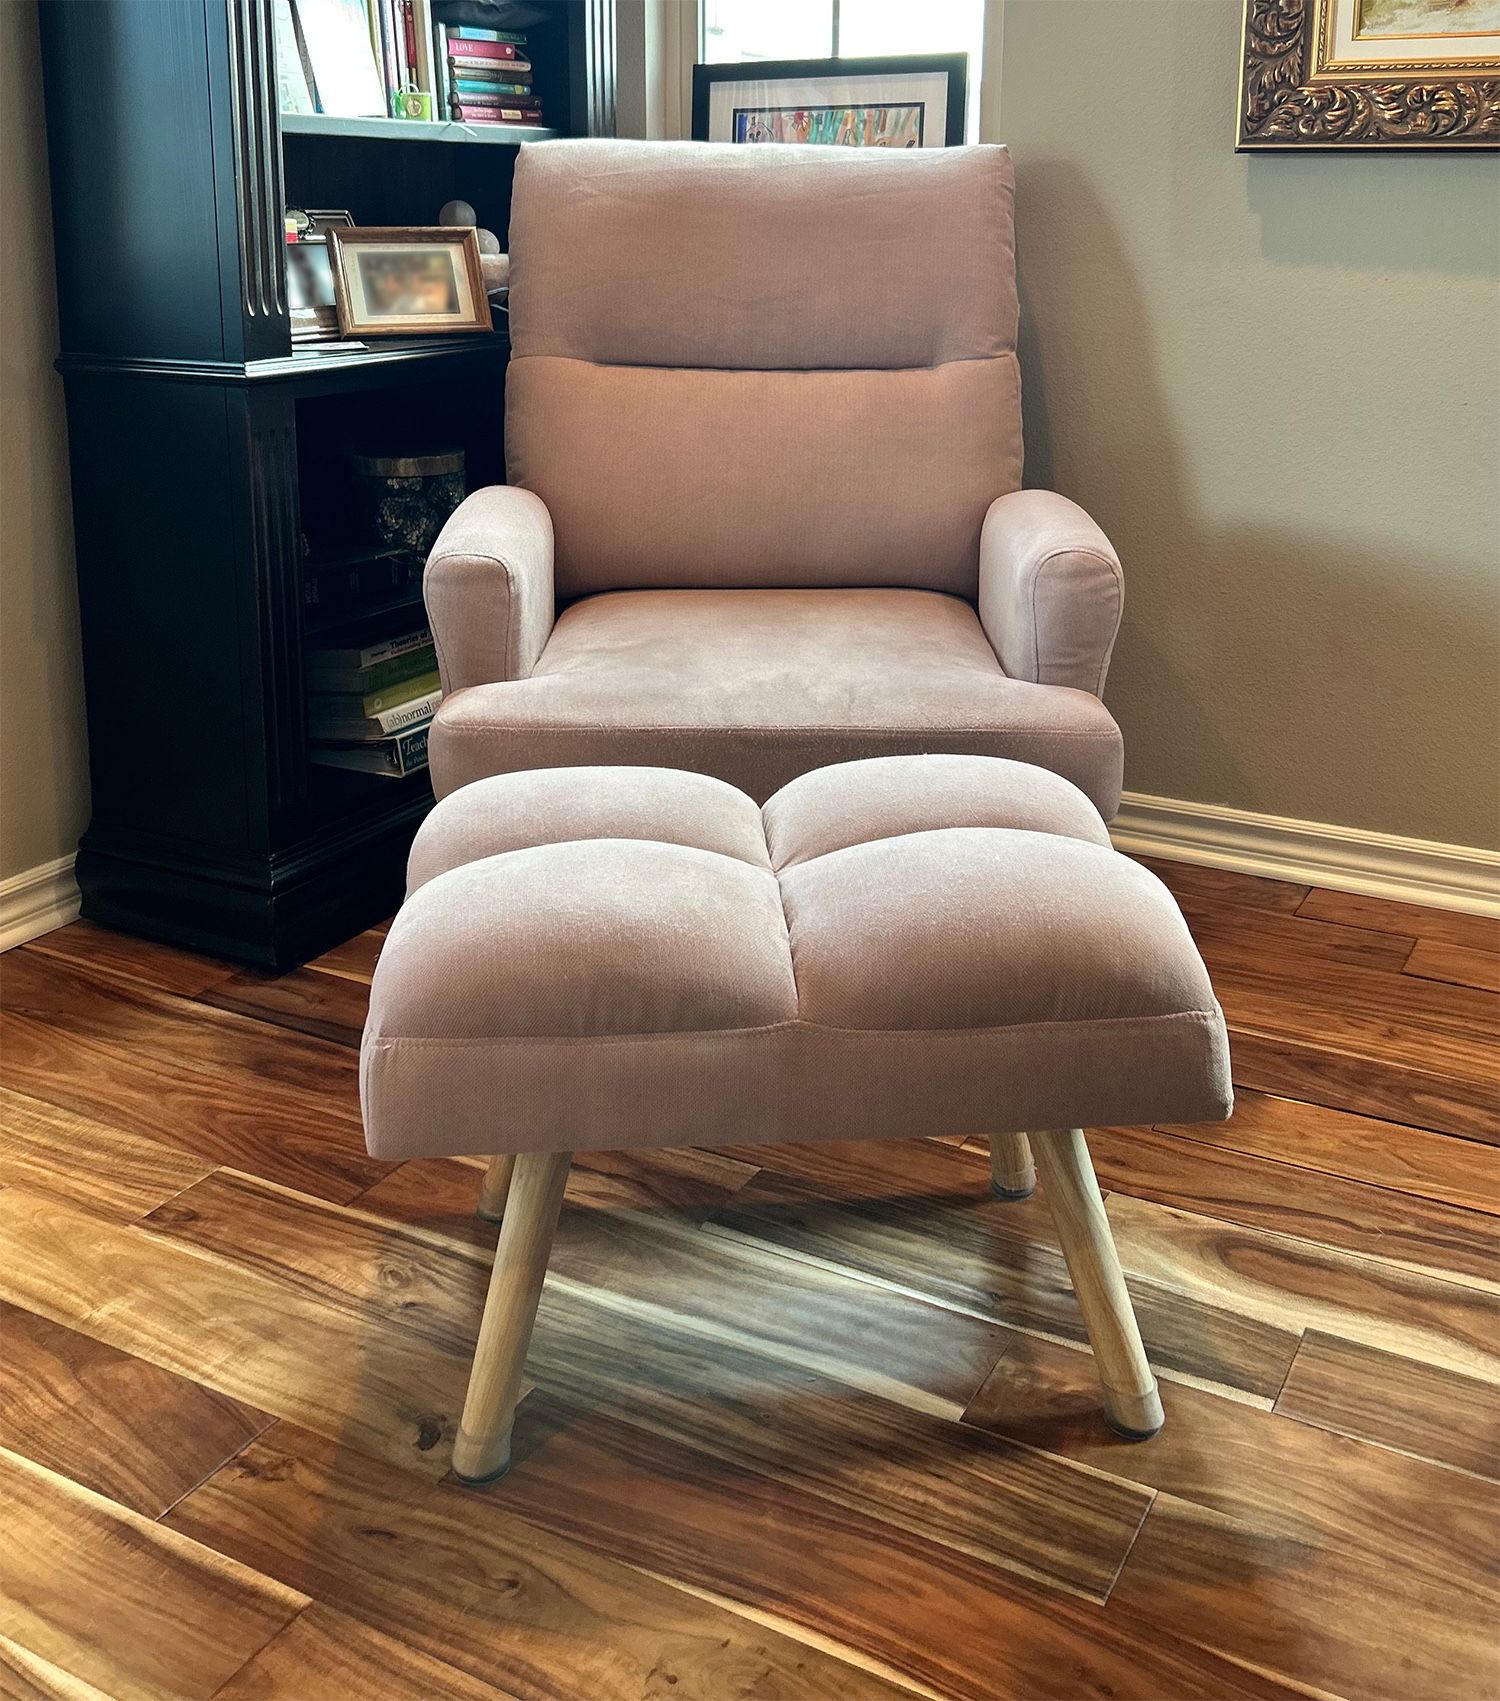 Chair With Ottoman (set of 2)